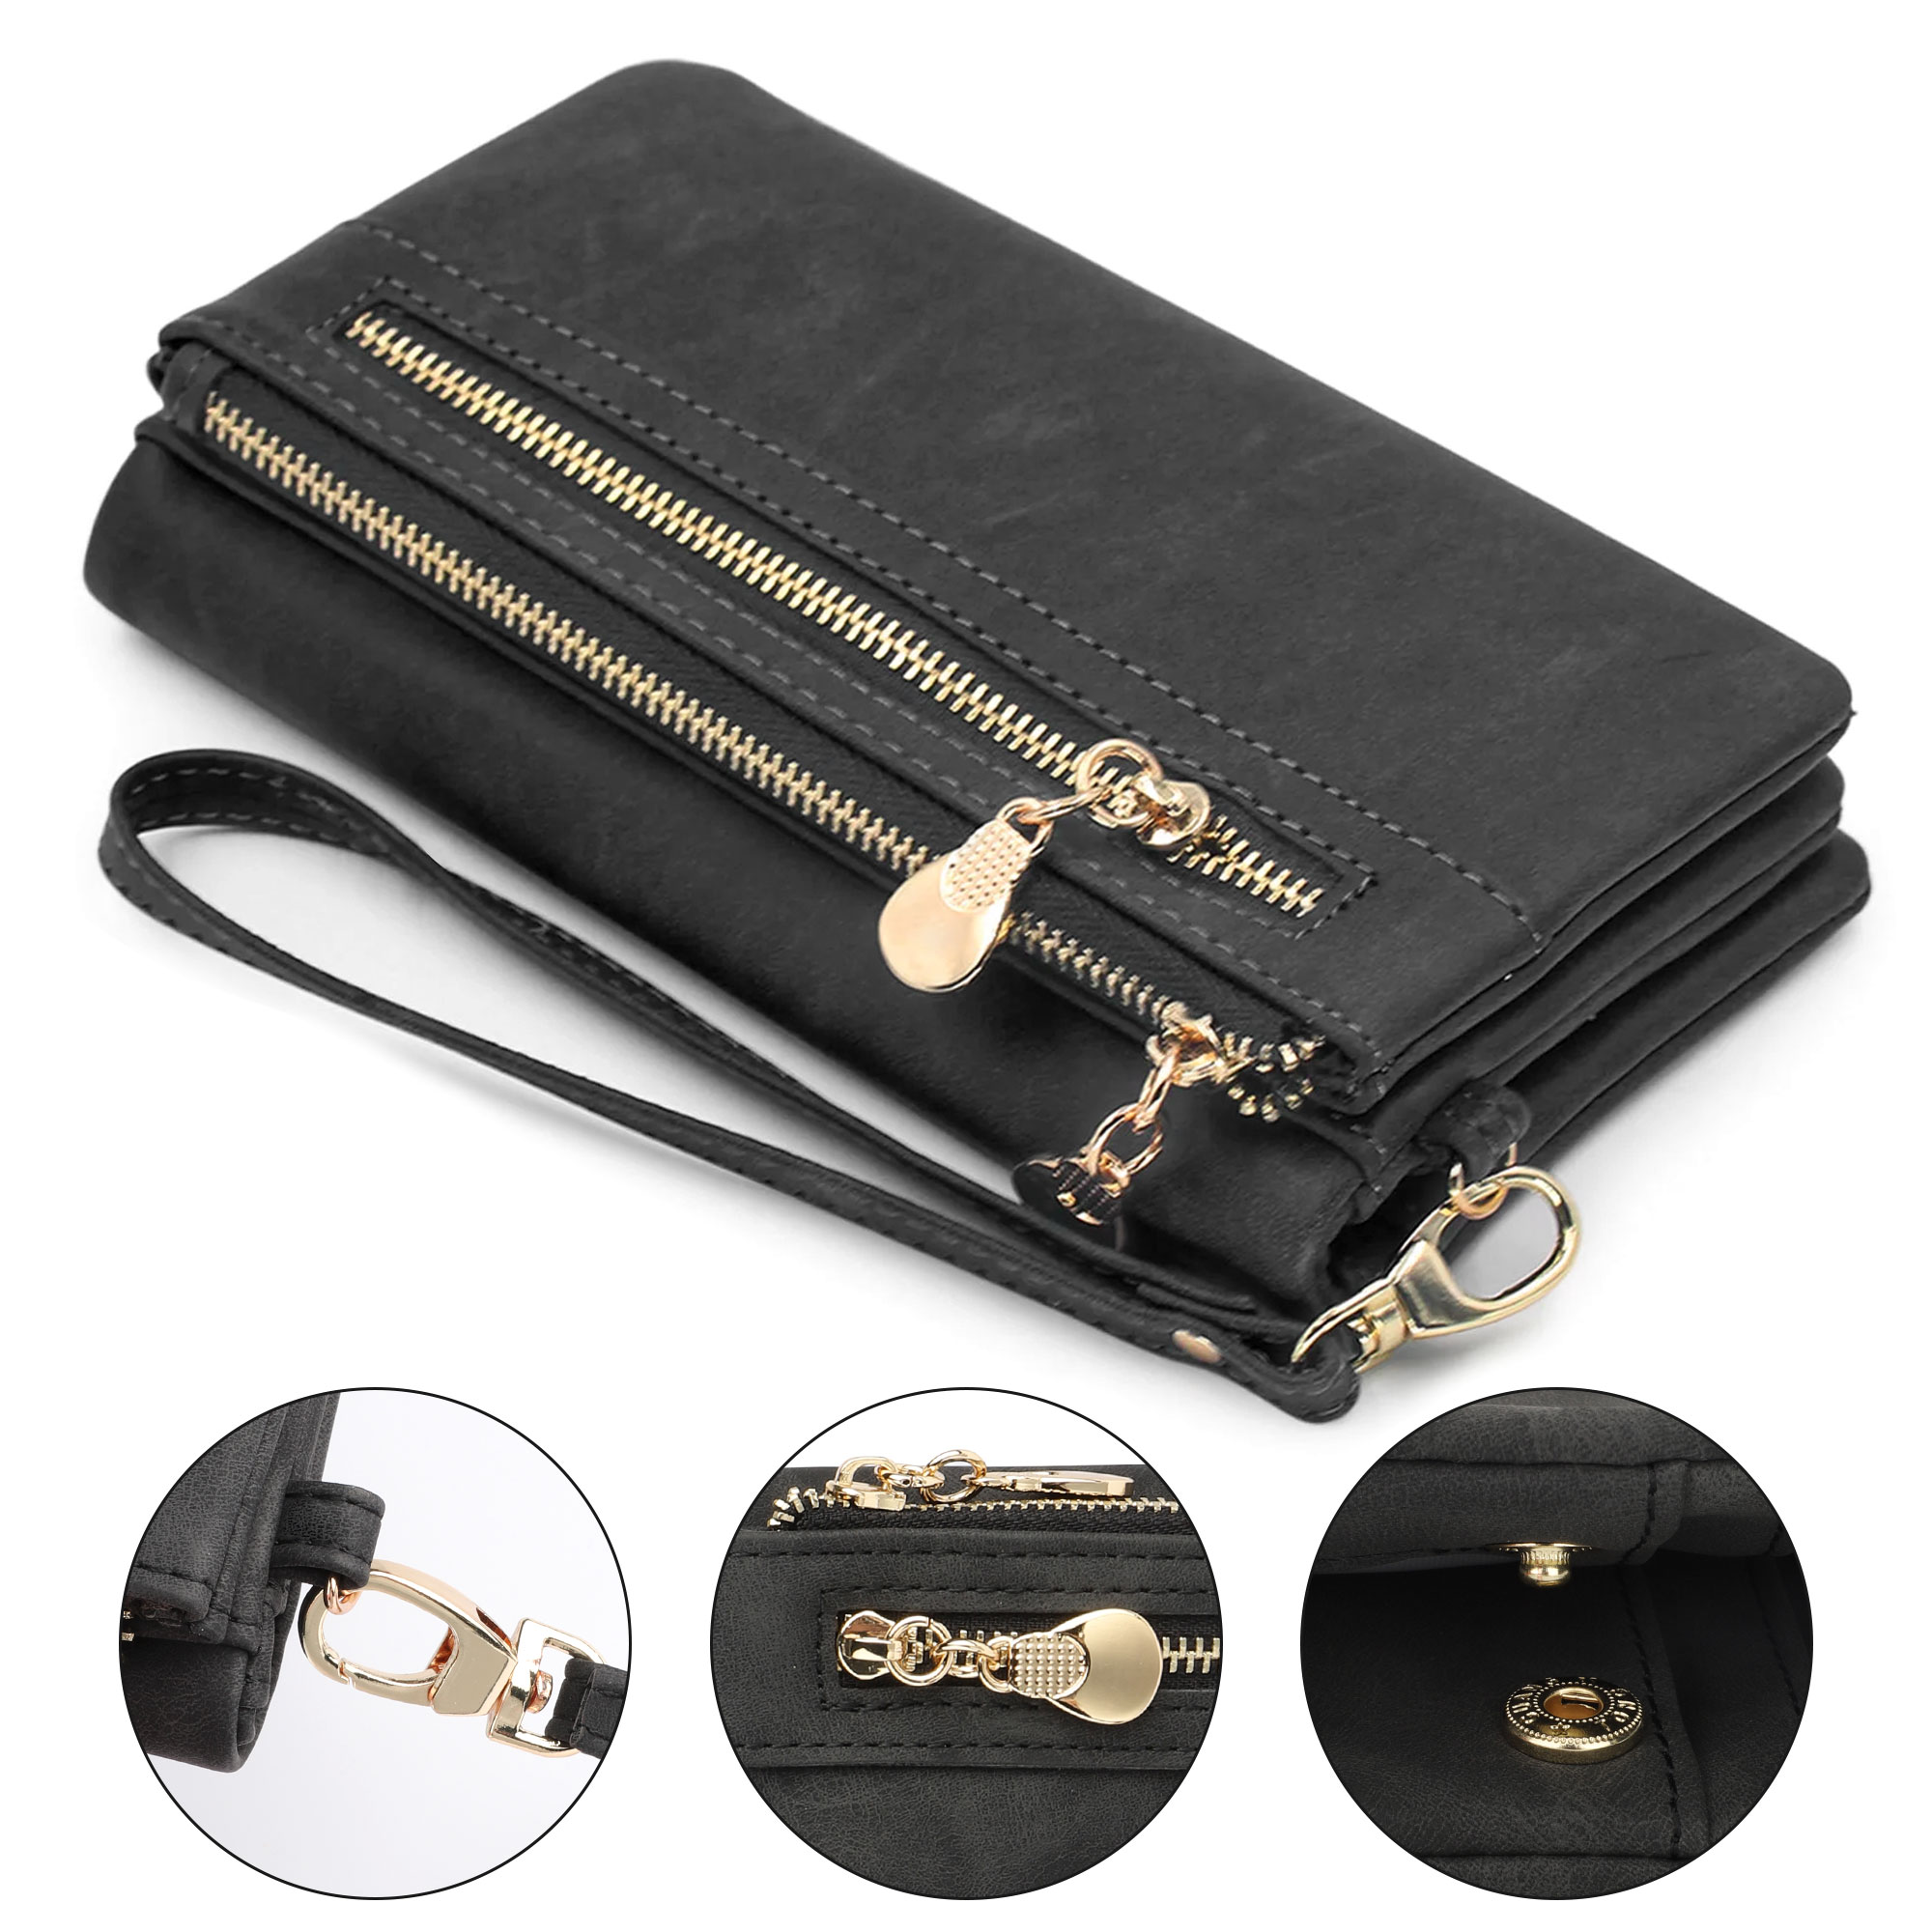 EEEkit Leather Clutch Wallet for Women, Large Capacity Bifold Credit Card Holder, Ladies Stylish Zipper Purse with Wristband - image 1 of 8